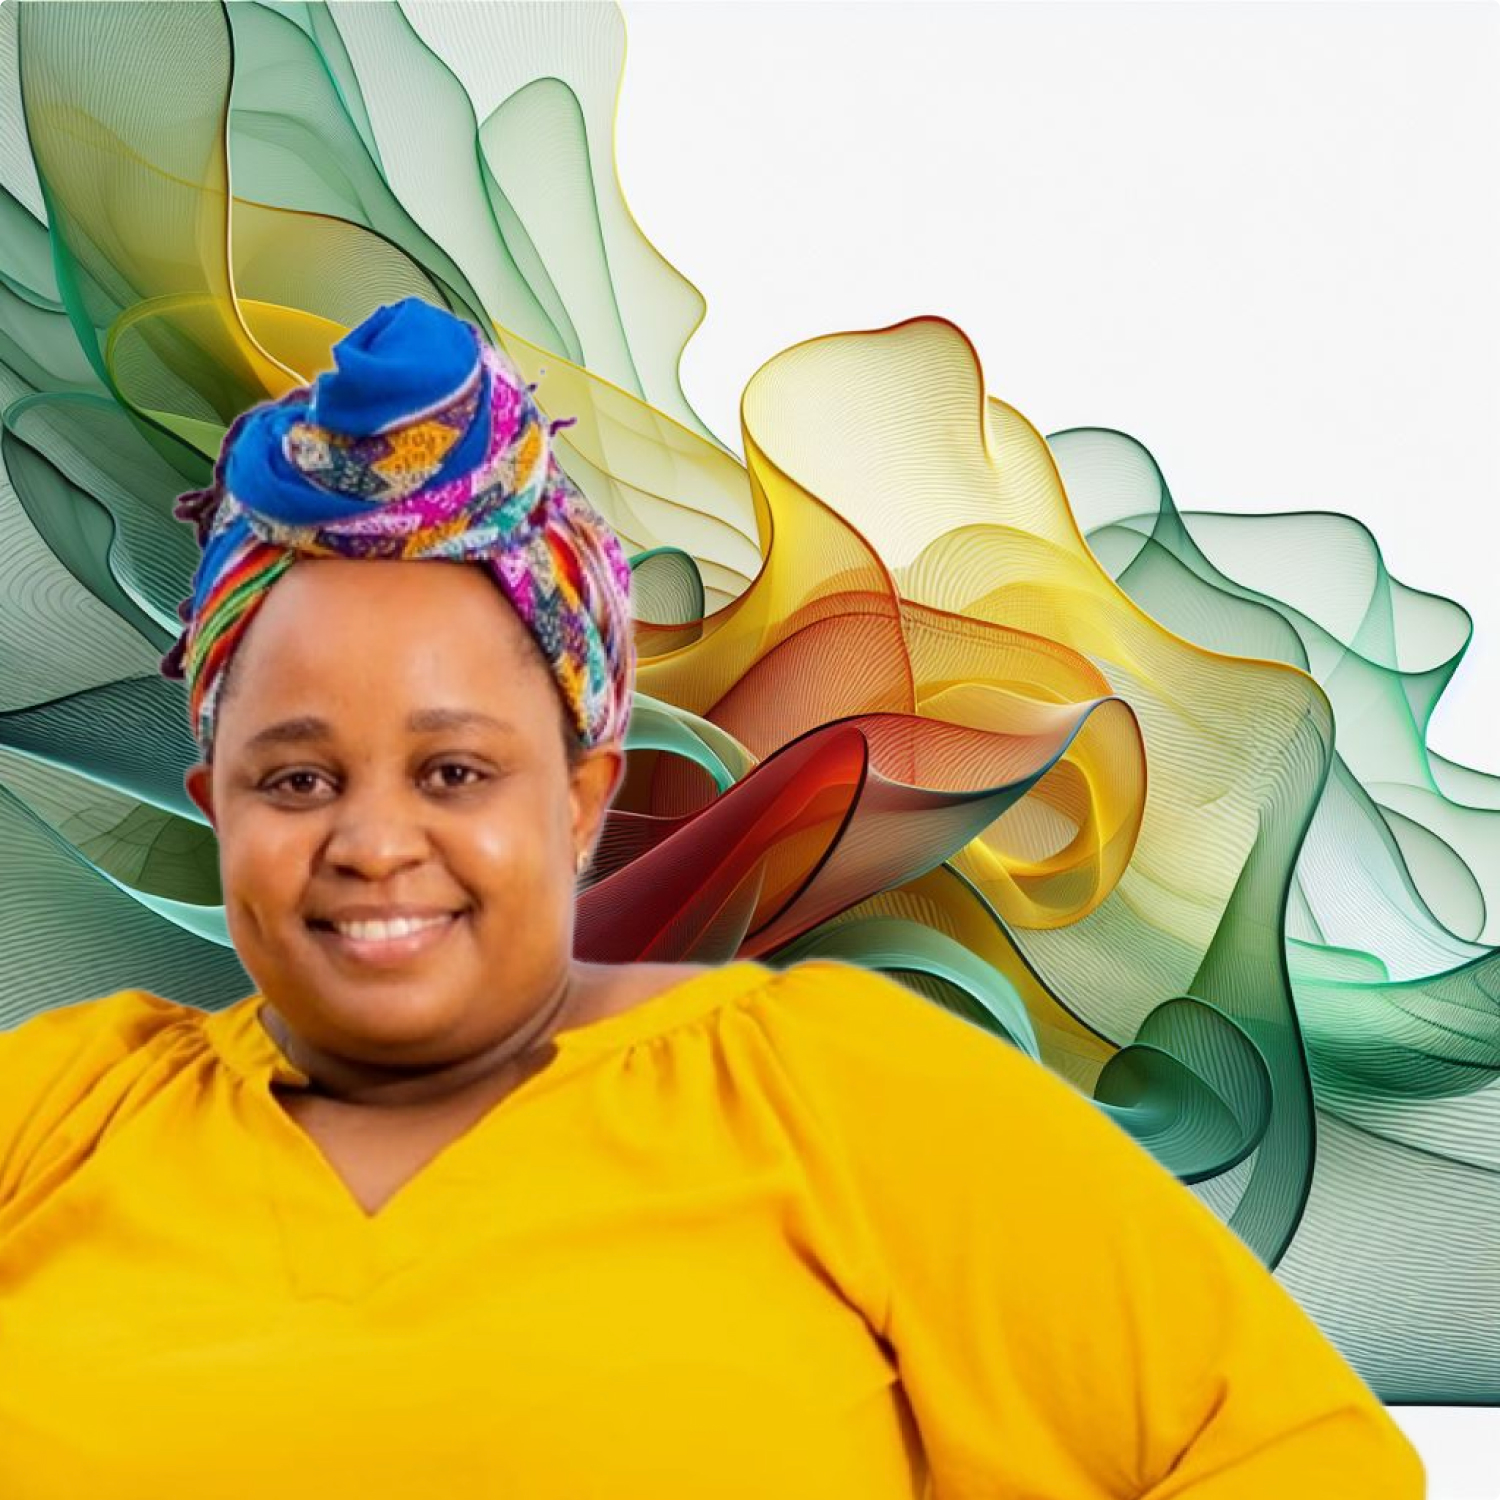 A smiling woman in a yellow top and colorful headwrap against a backdrop of vibrant, abstract wave designs.